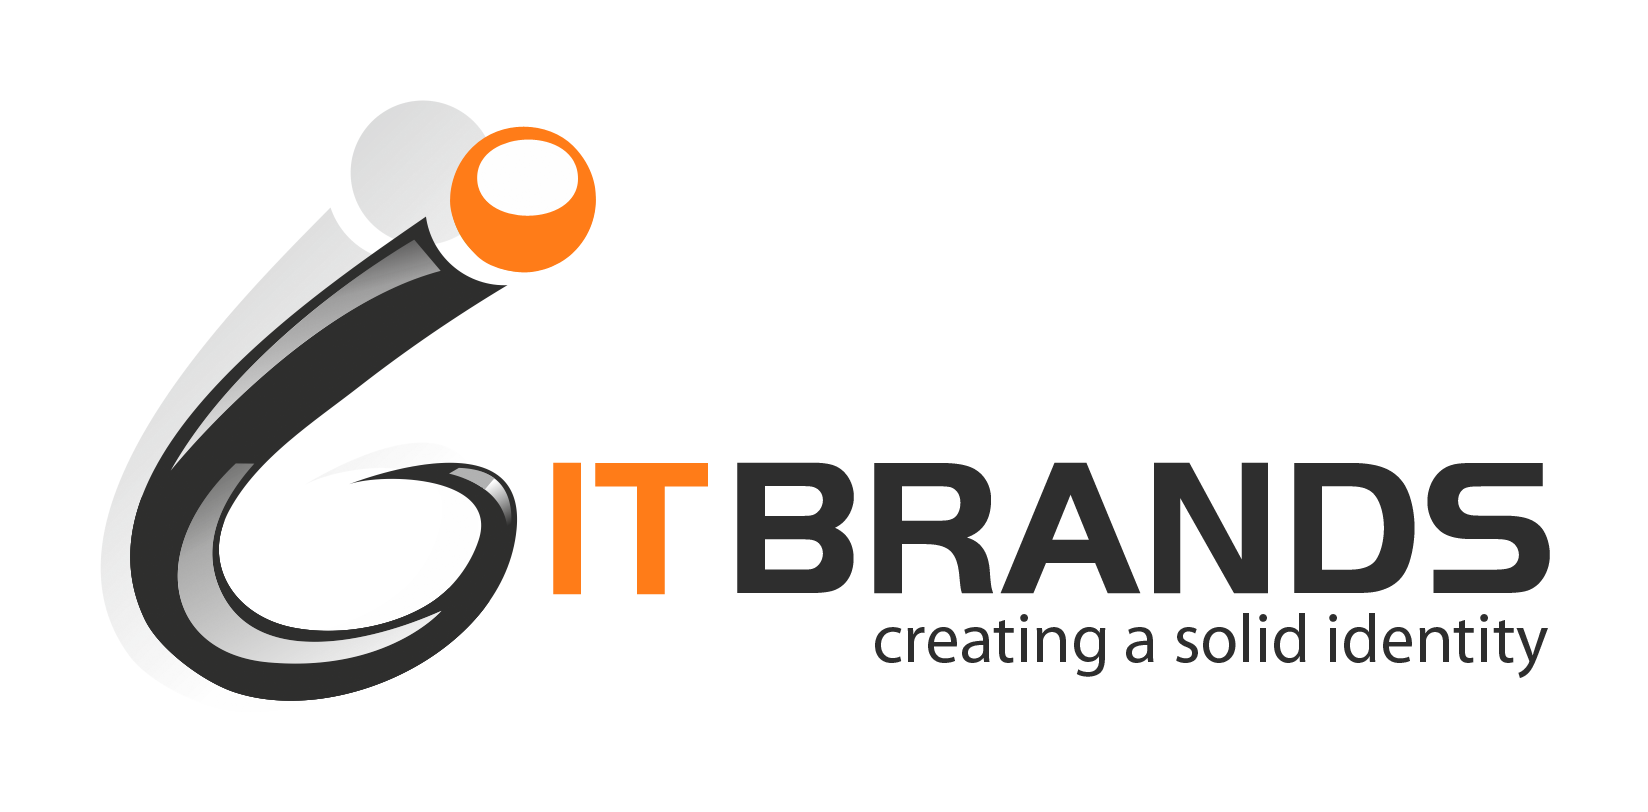 IT-Brands - Creating a solid identity